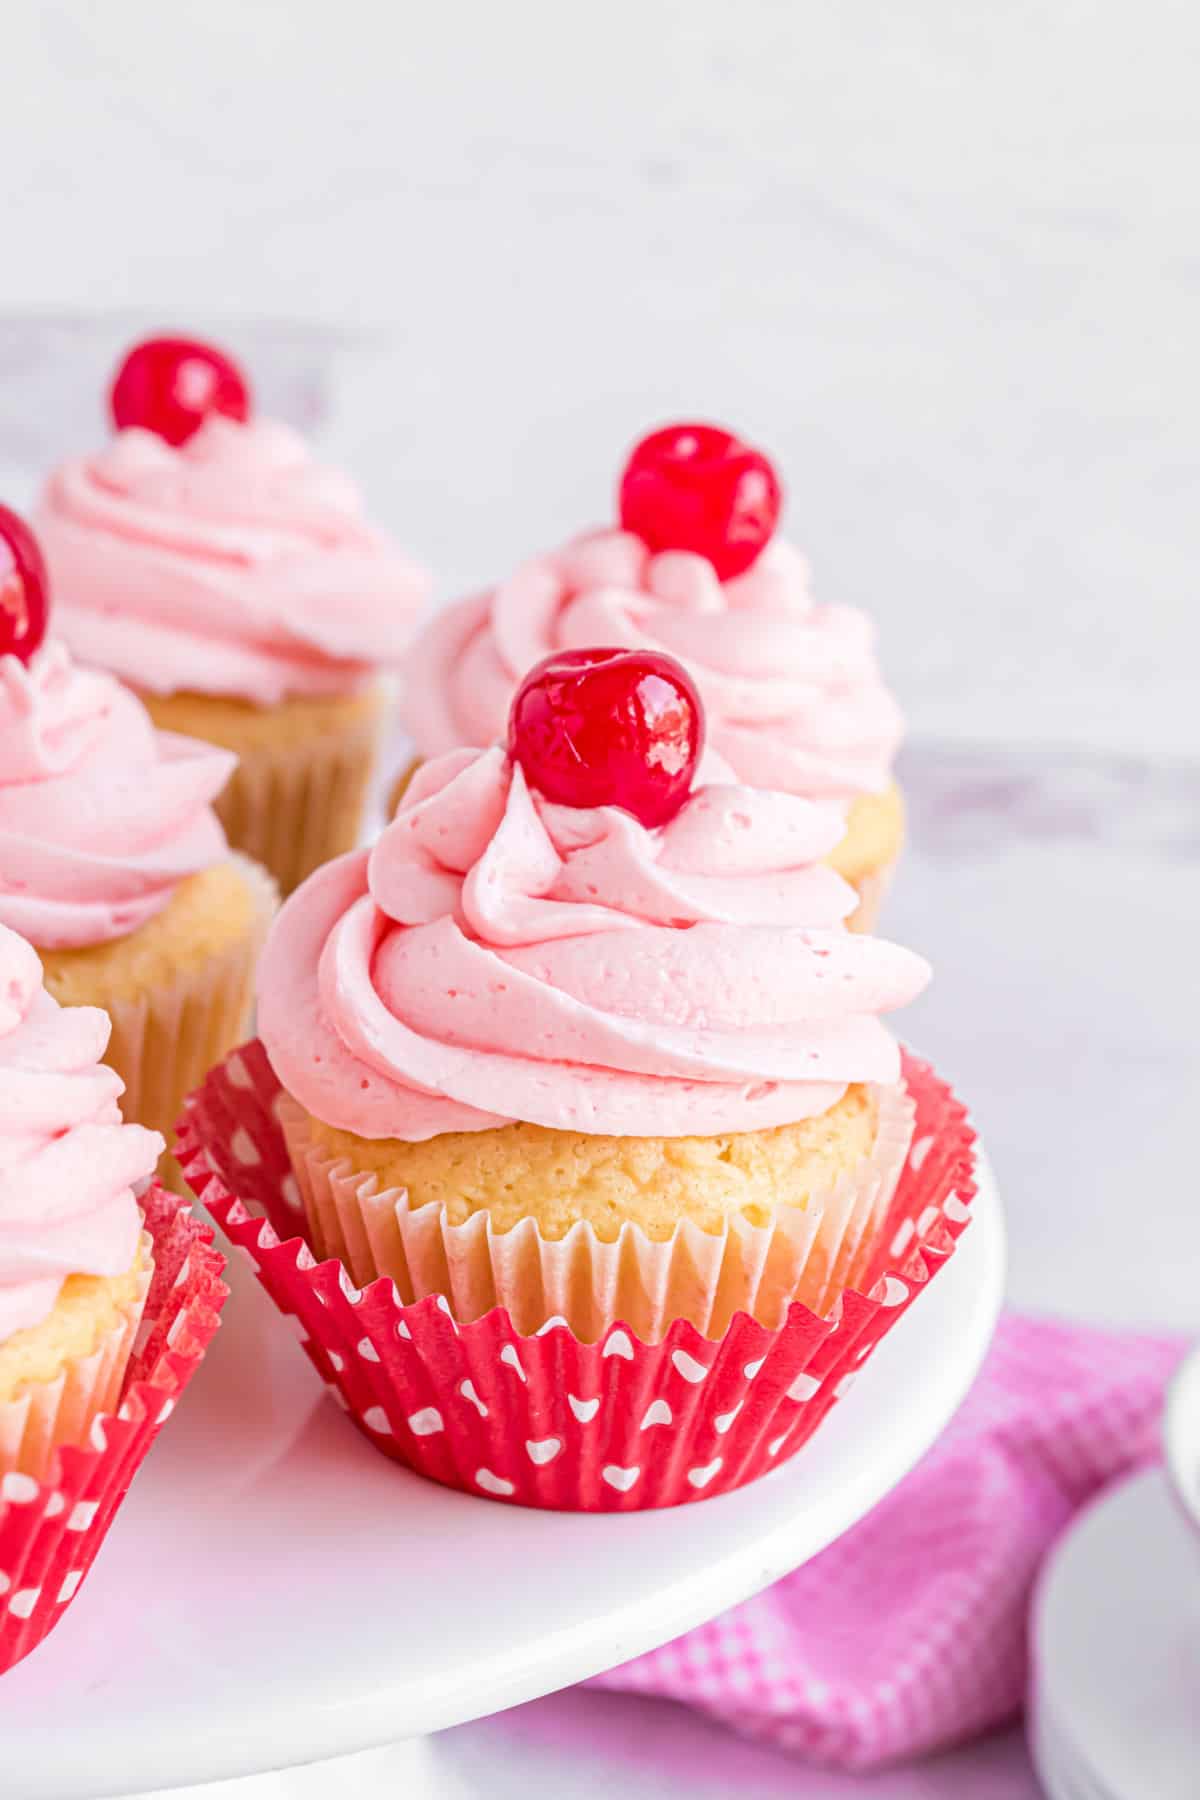 Cherry almond cupcakes on a white cake plate.